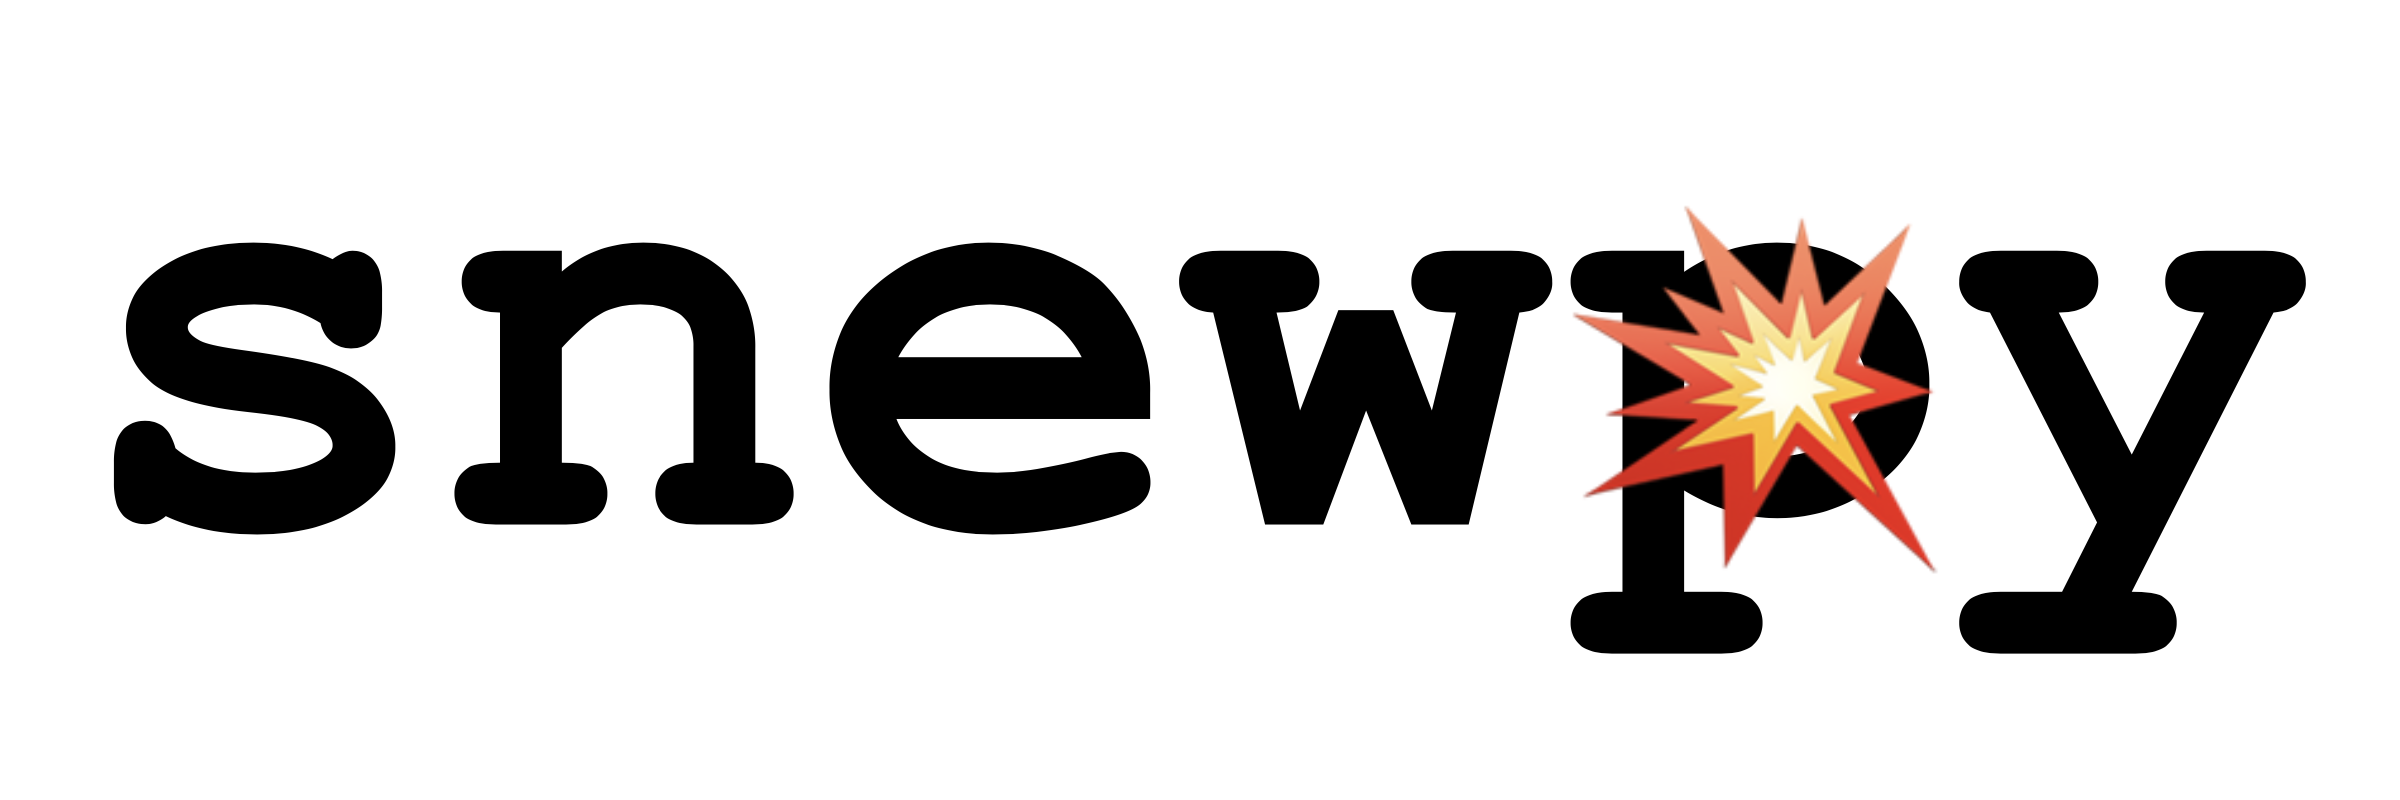 snewpy logo: The word 'snewpy' in a monospace font, with an explosion emoji inside the letter 'p'.